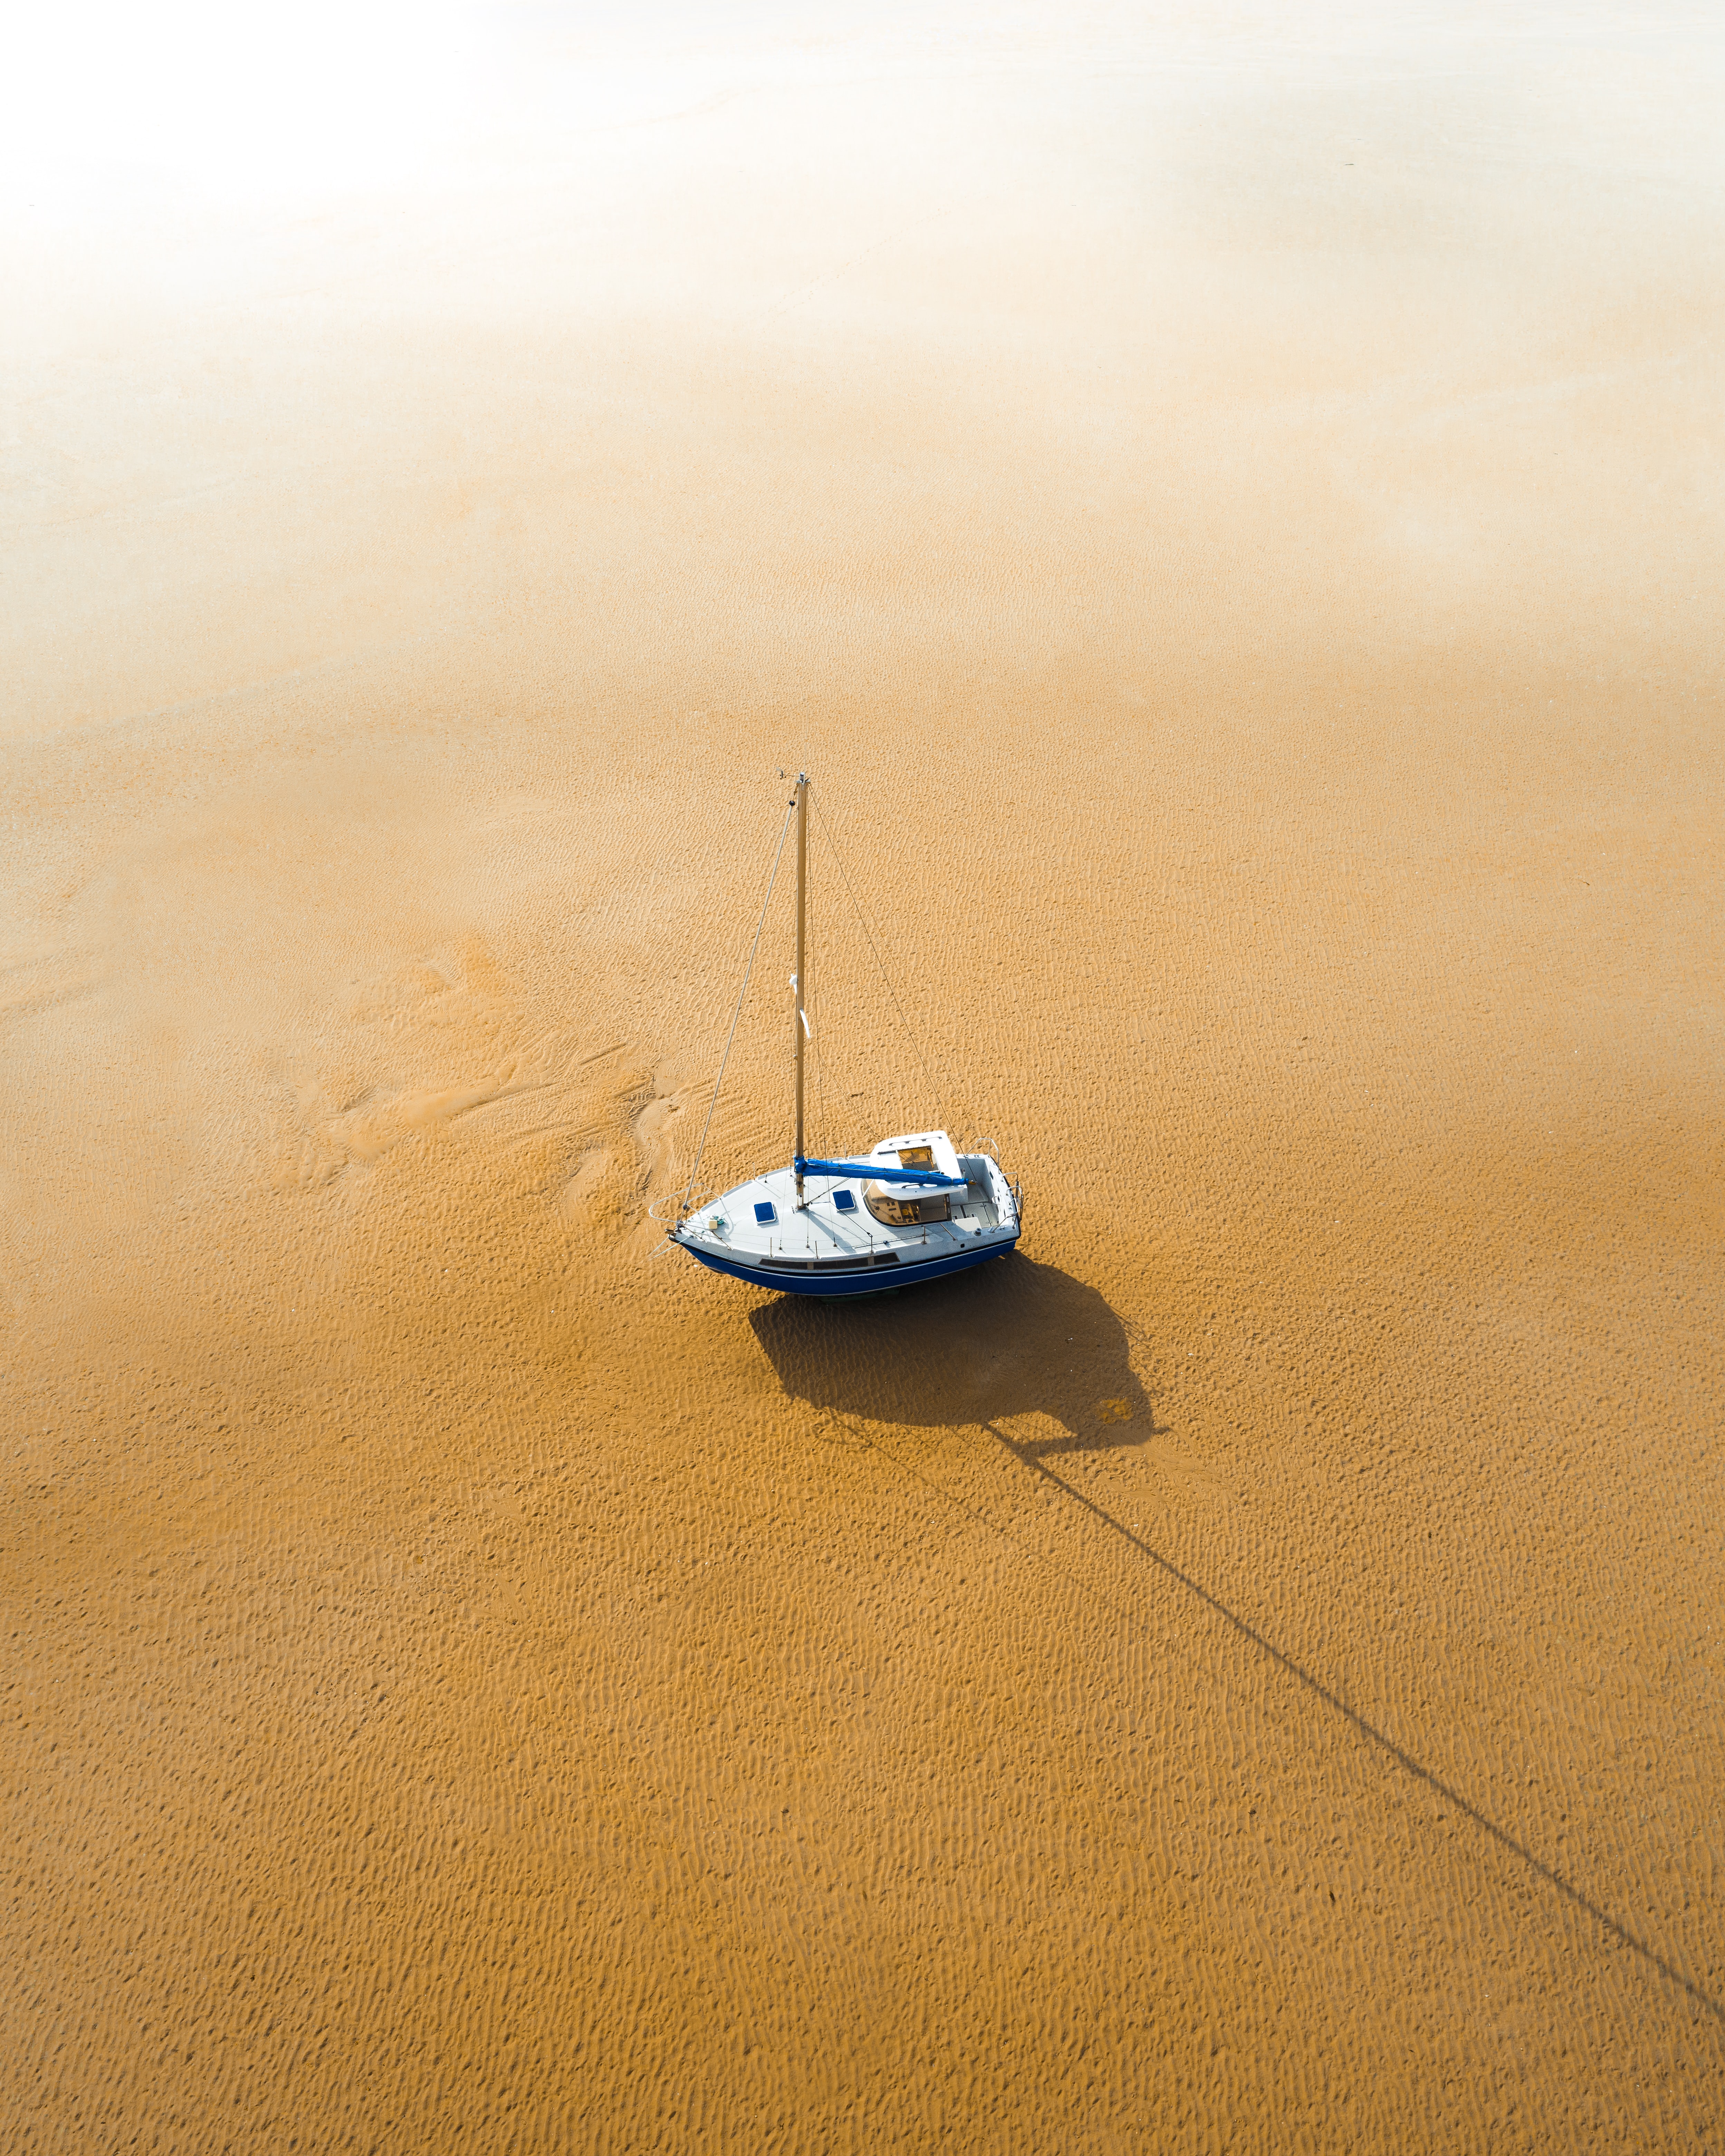 android sailboat, sand, view from above, miscellanea, miscellaneous, boat, sailfish